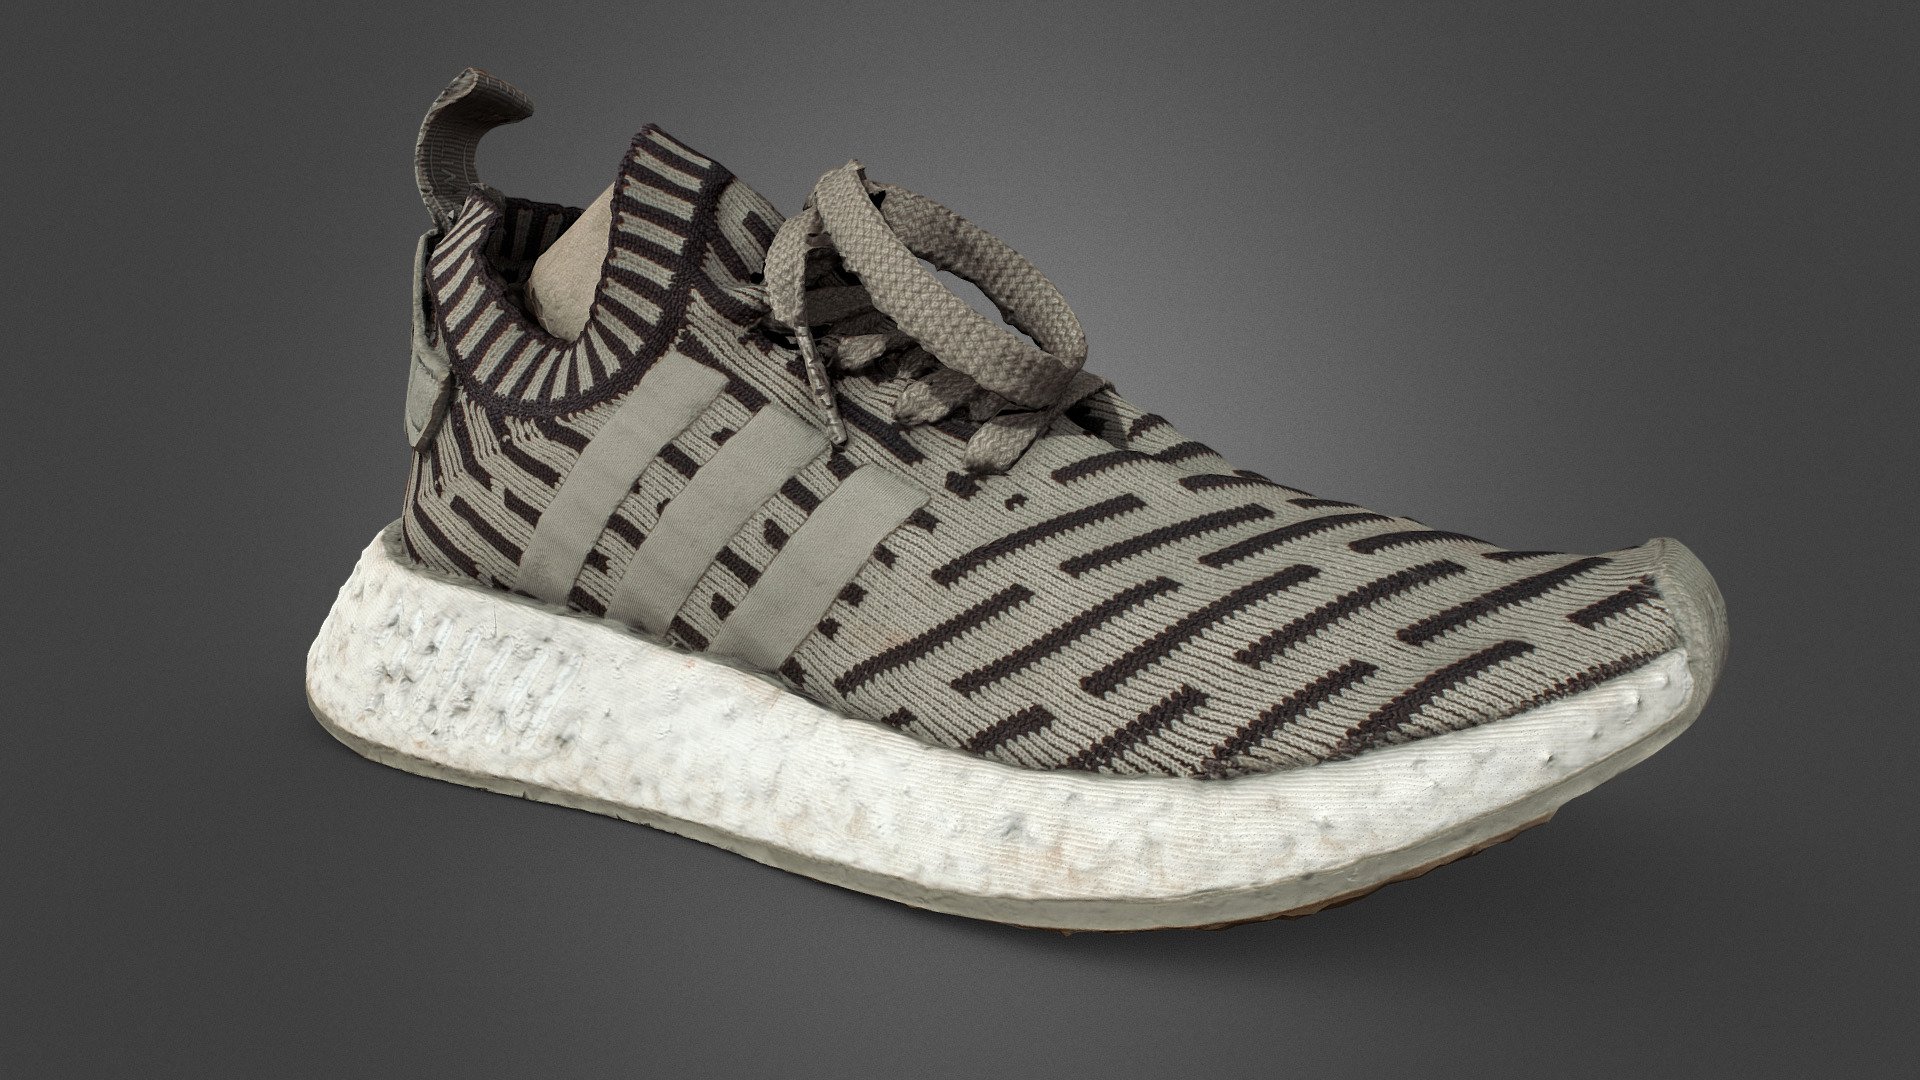 Quick scan of sneaker shoe Adidas NMD. 88 shots with canon 200D, process in Reality Capture in 00h:13m:57s in normal detail. Baked with xNormal 4K textures 3d model